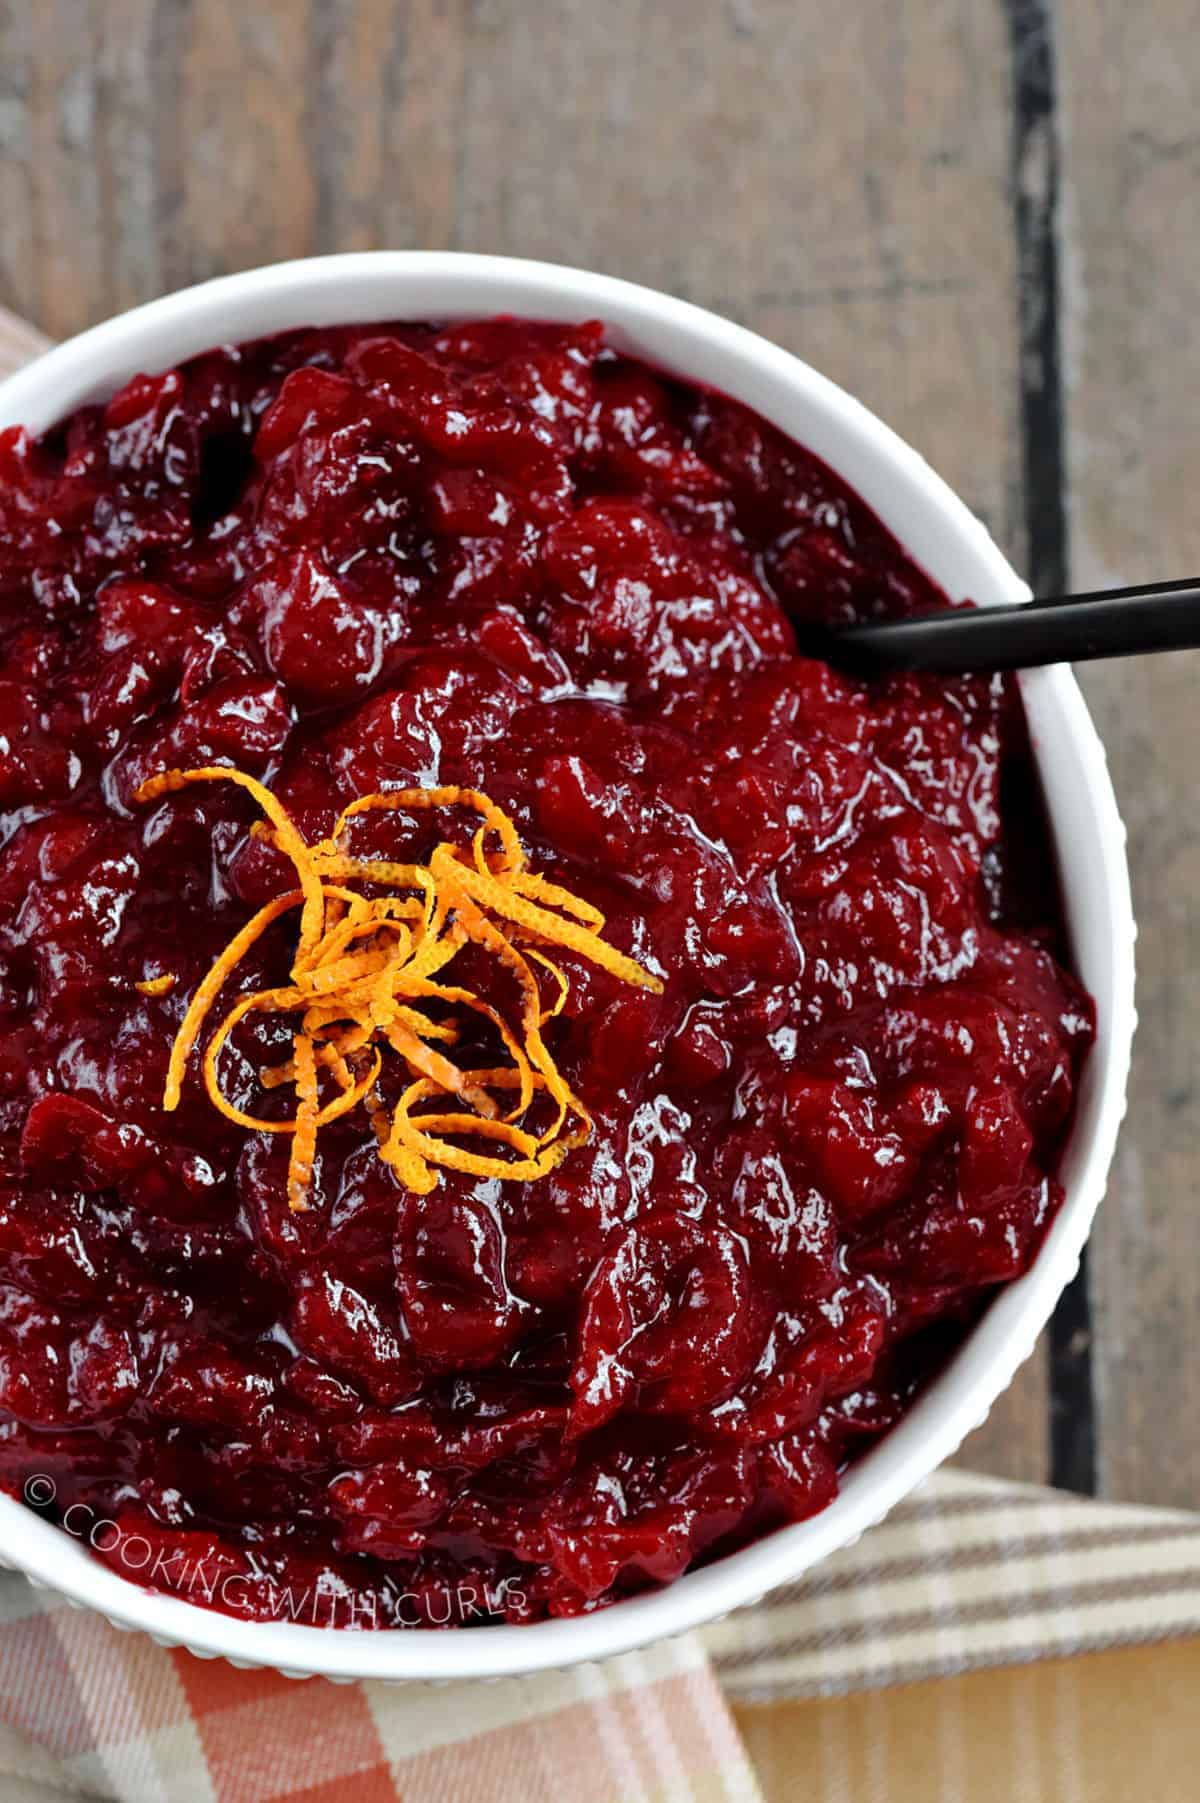 Looking down on a bowl of orange amaretto cranberry sauce garnished with strips of orange zest.